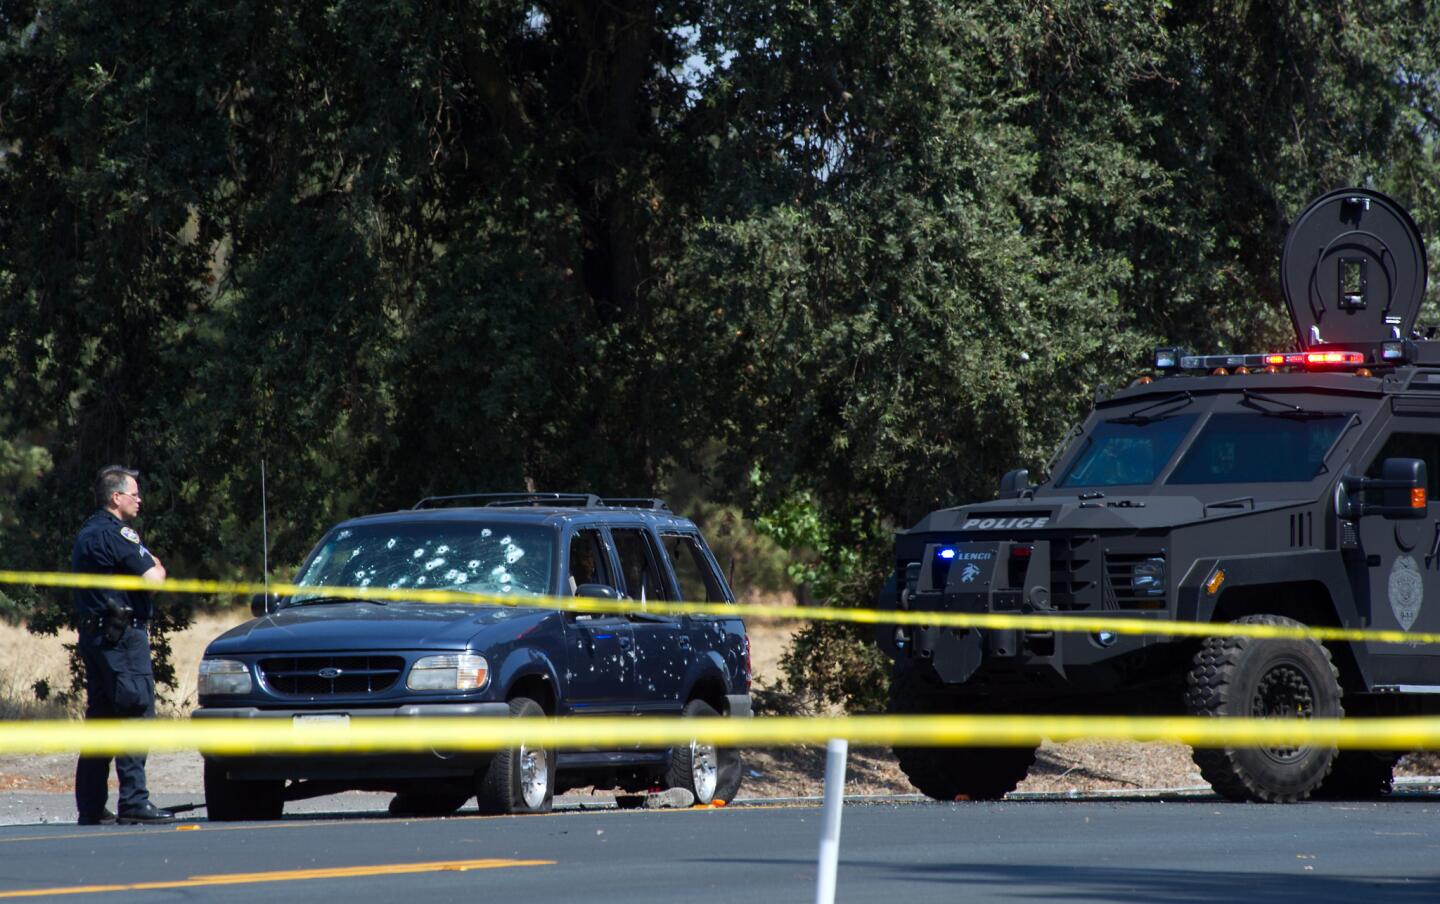 A Stockton police officer investigates the scene after a vehicle involved in a suspected bank robbery was stopped in the Northern California city. Three women were taken hostage by the alleged robbers; two were shot and thrown or leaped from the getaway vehicle, the other was killed.